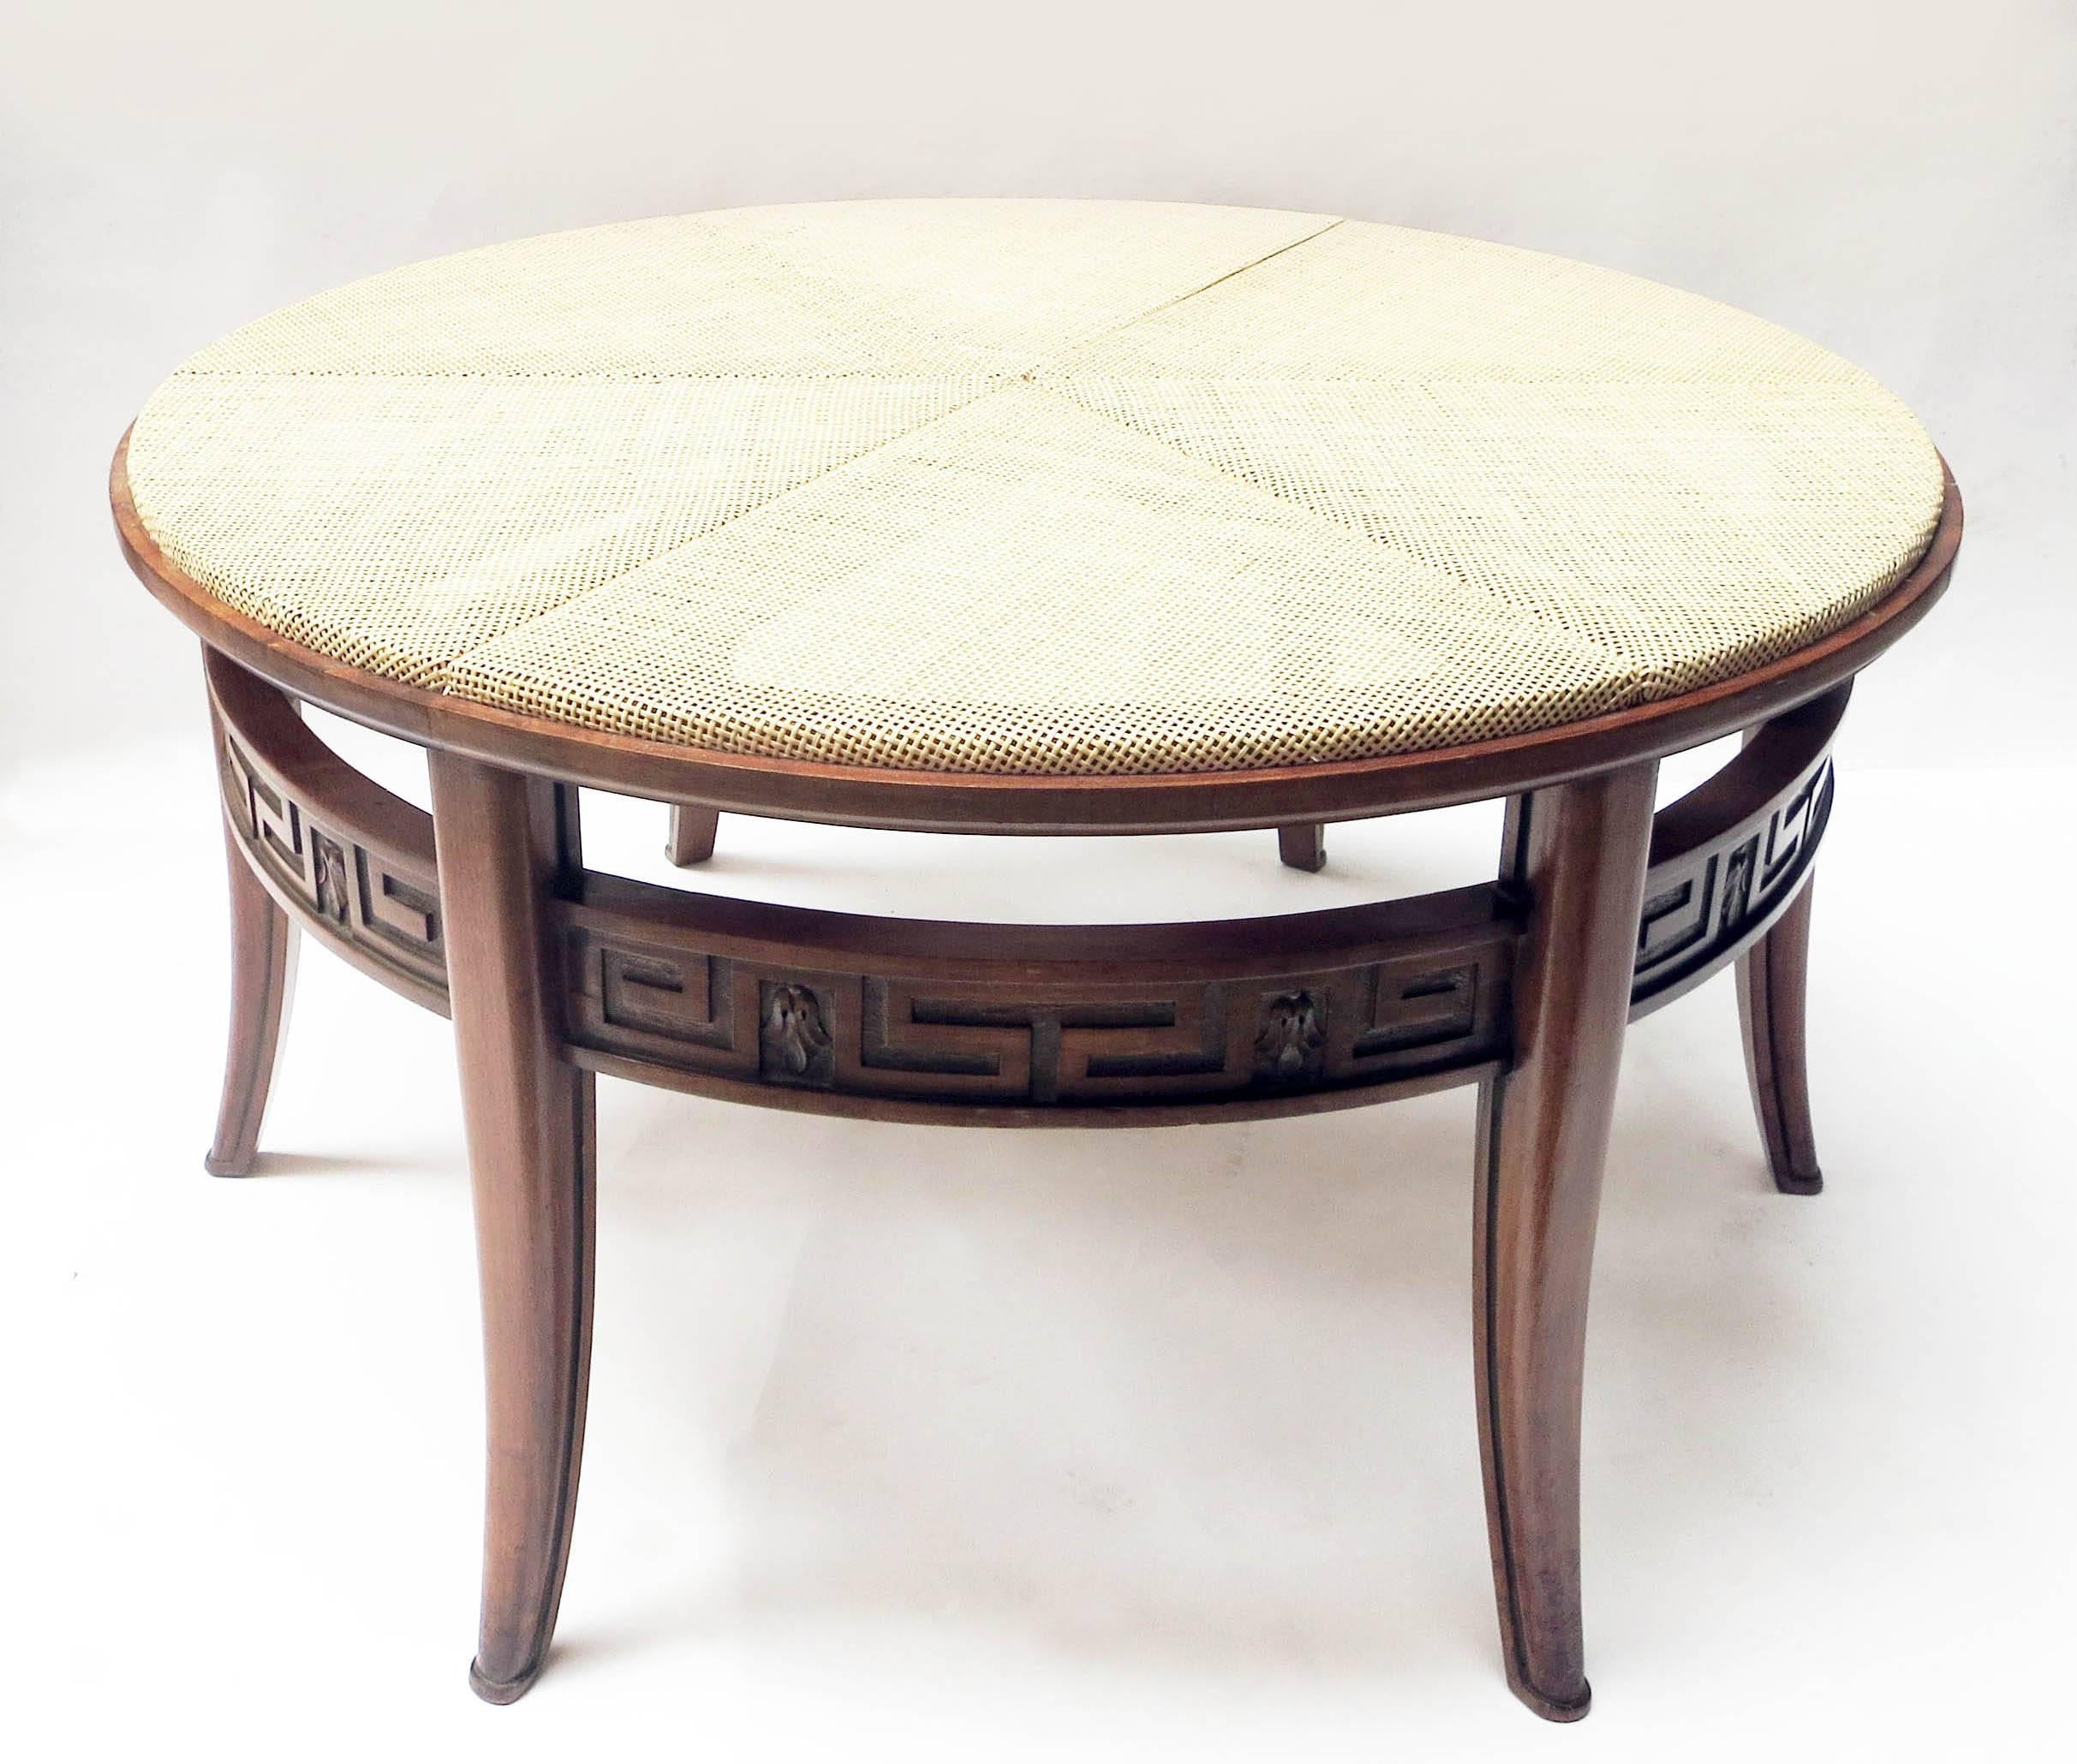 Mid-Century Modern Swedish Round Coffee Table with Cane Top, 1940s For Sale